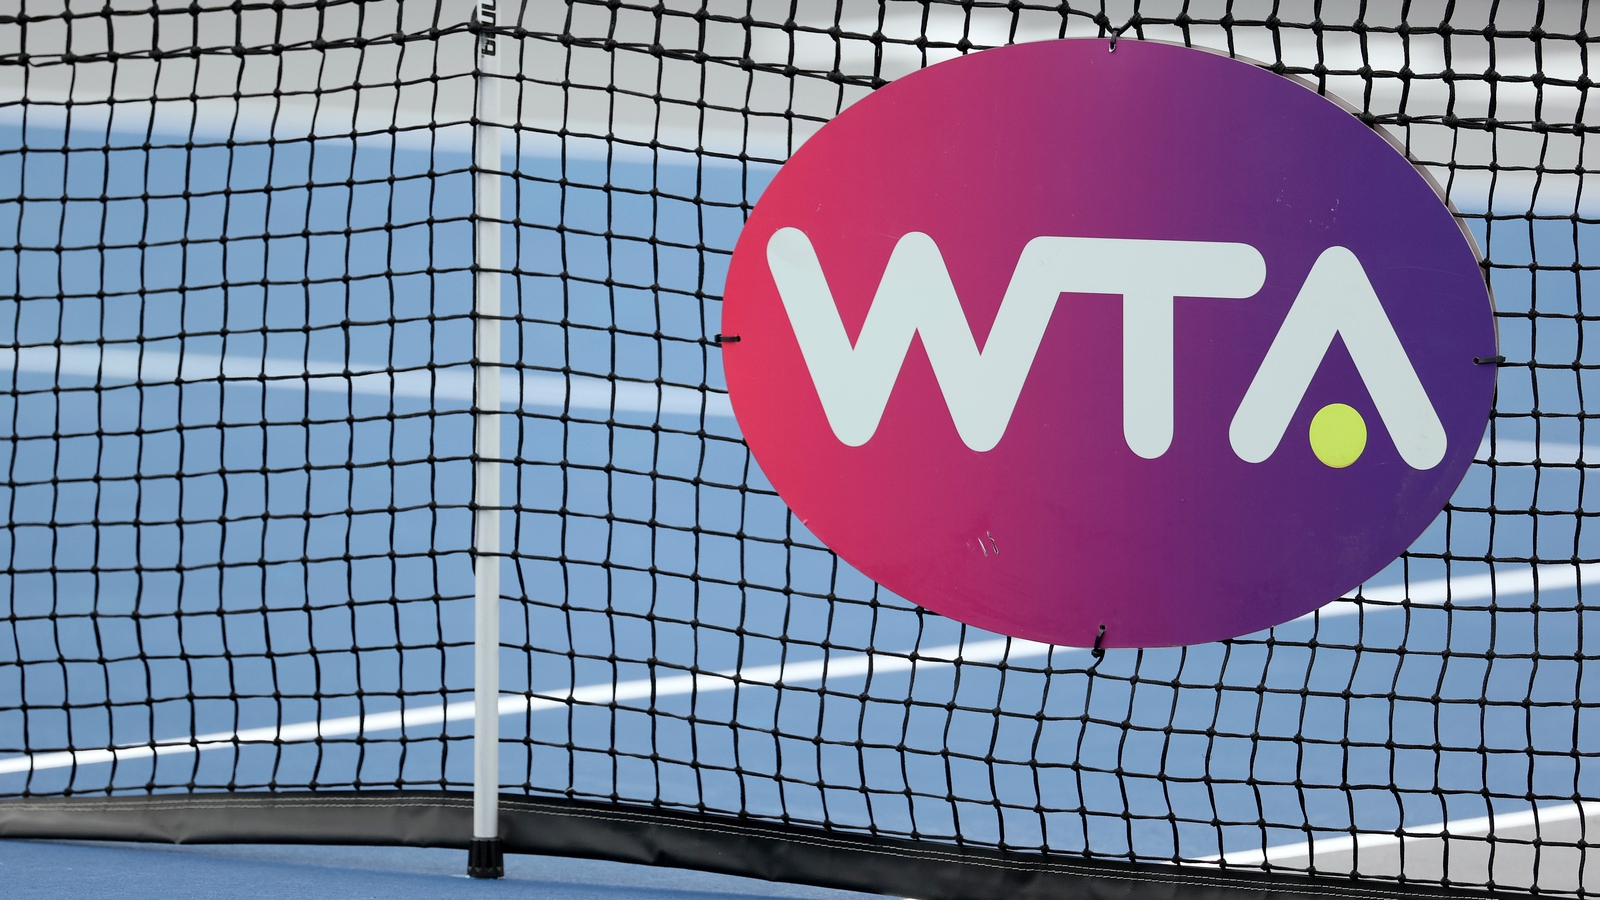 Private equity firm CVC makes major investment in WTA